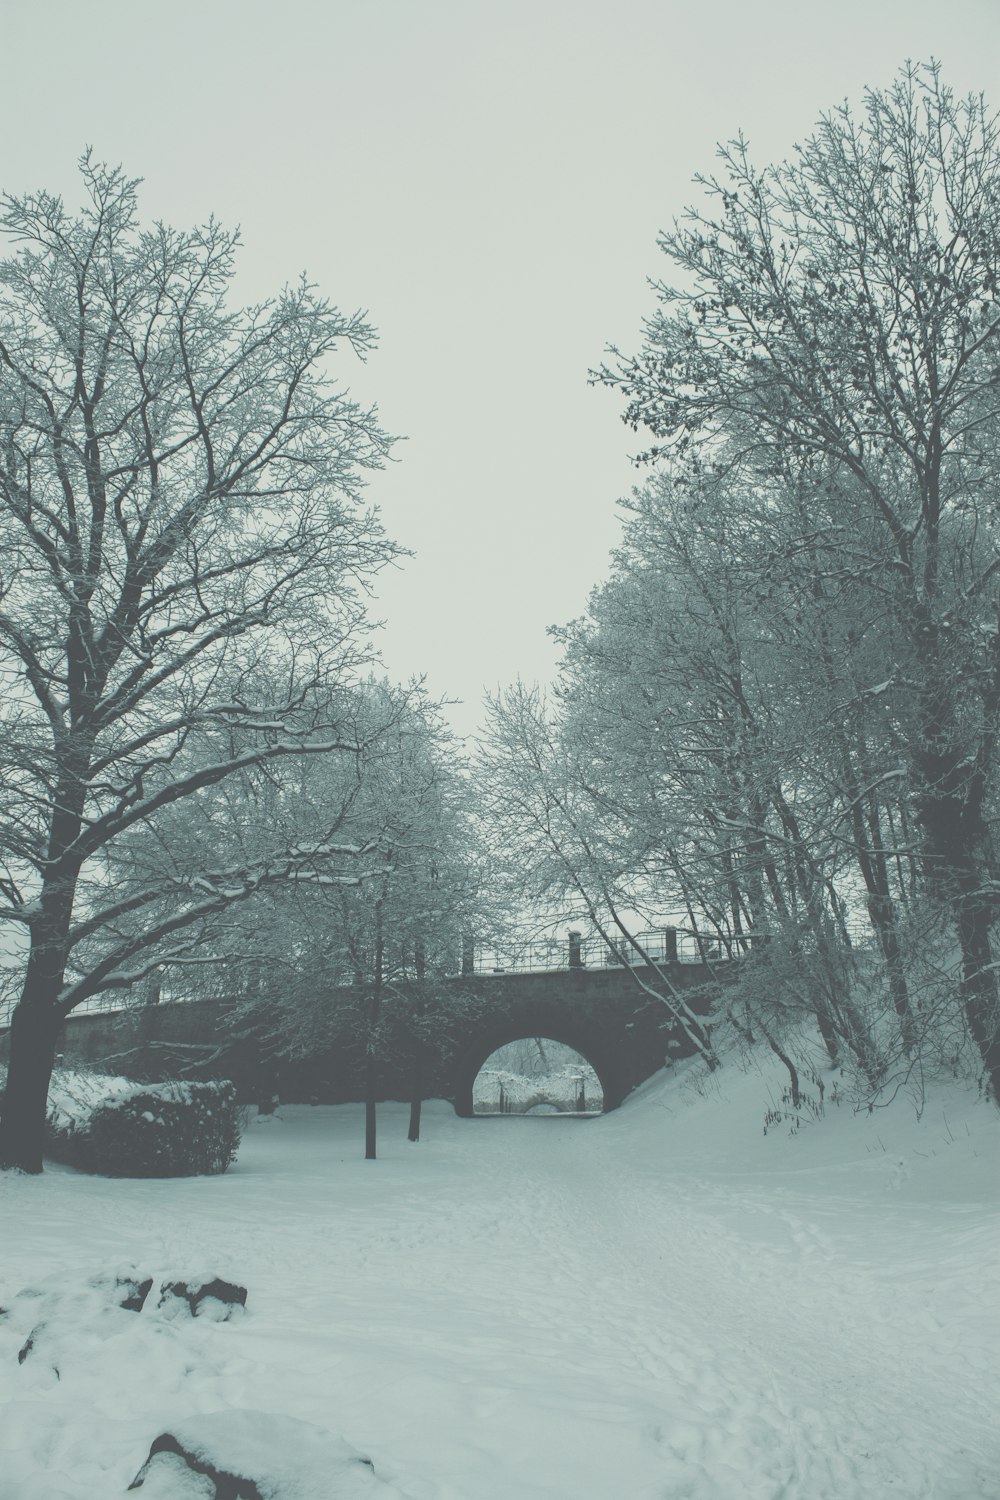 a bridge over a snow covered river in a park